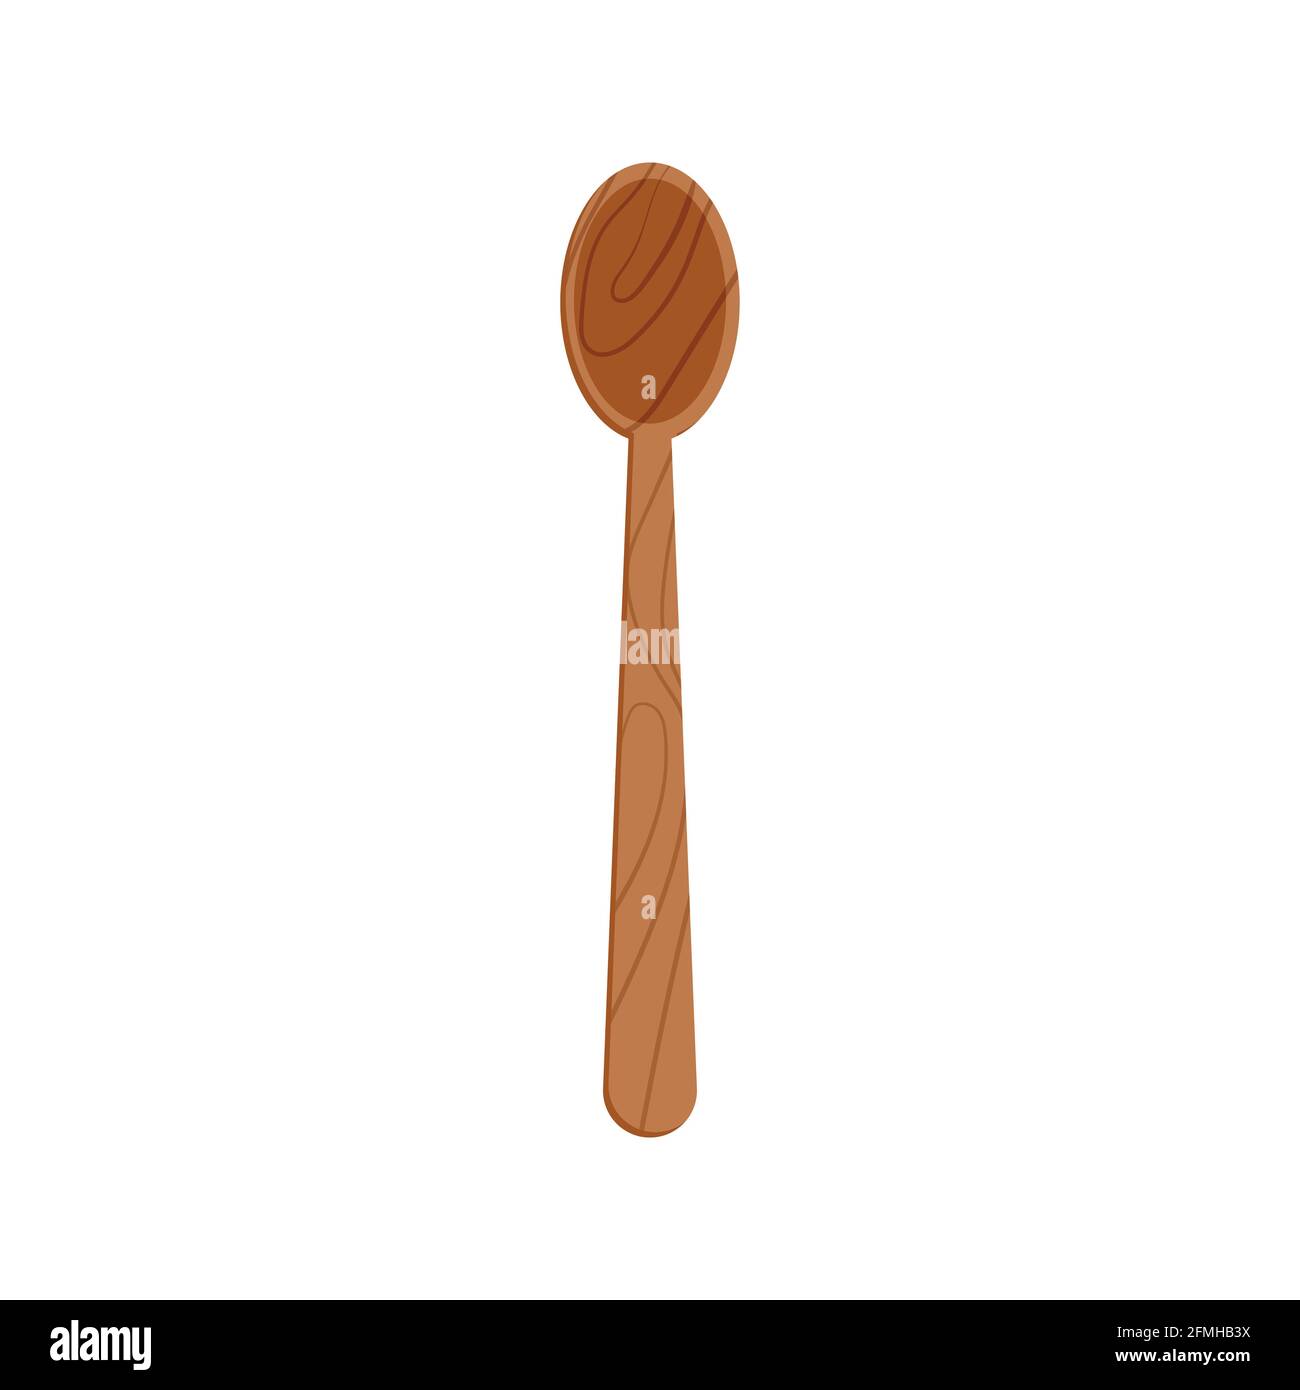 Wooden spoon with long handle icon isolated on white background. Stock Vector